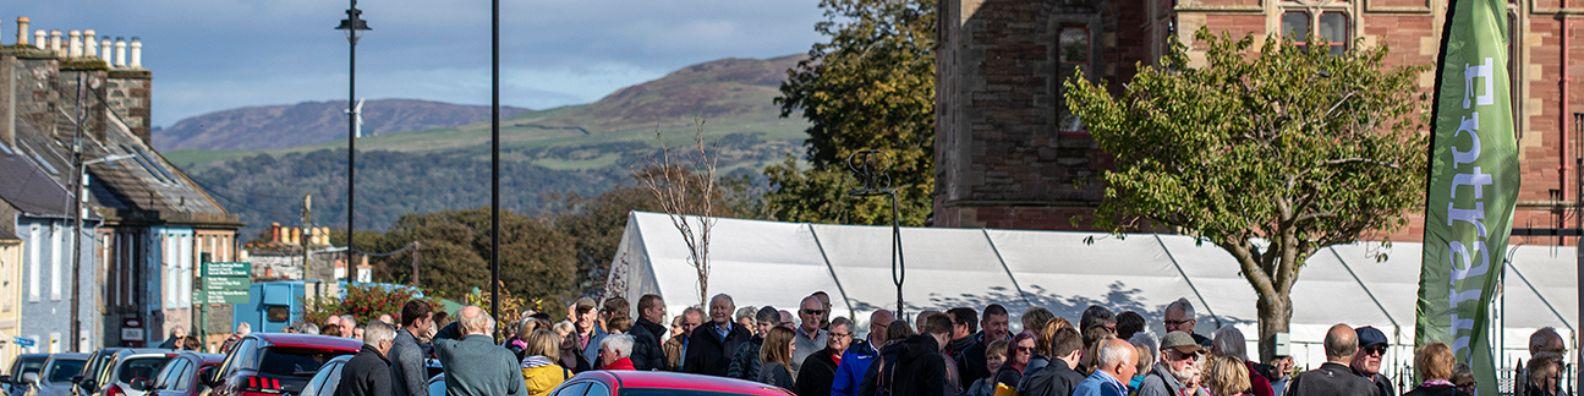 At Wigtown Book Festival crowds are queuing outside a marquee for an event. Views to the hills beyond on a sunny autumn day.